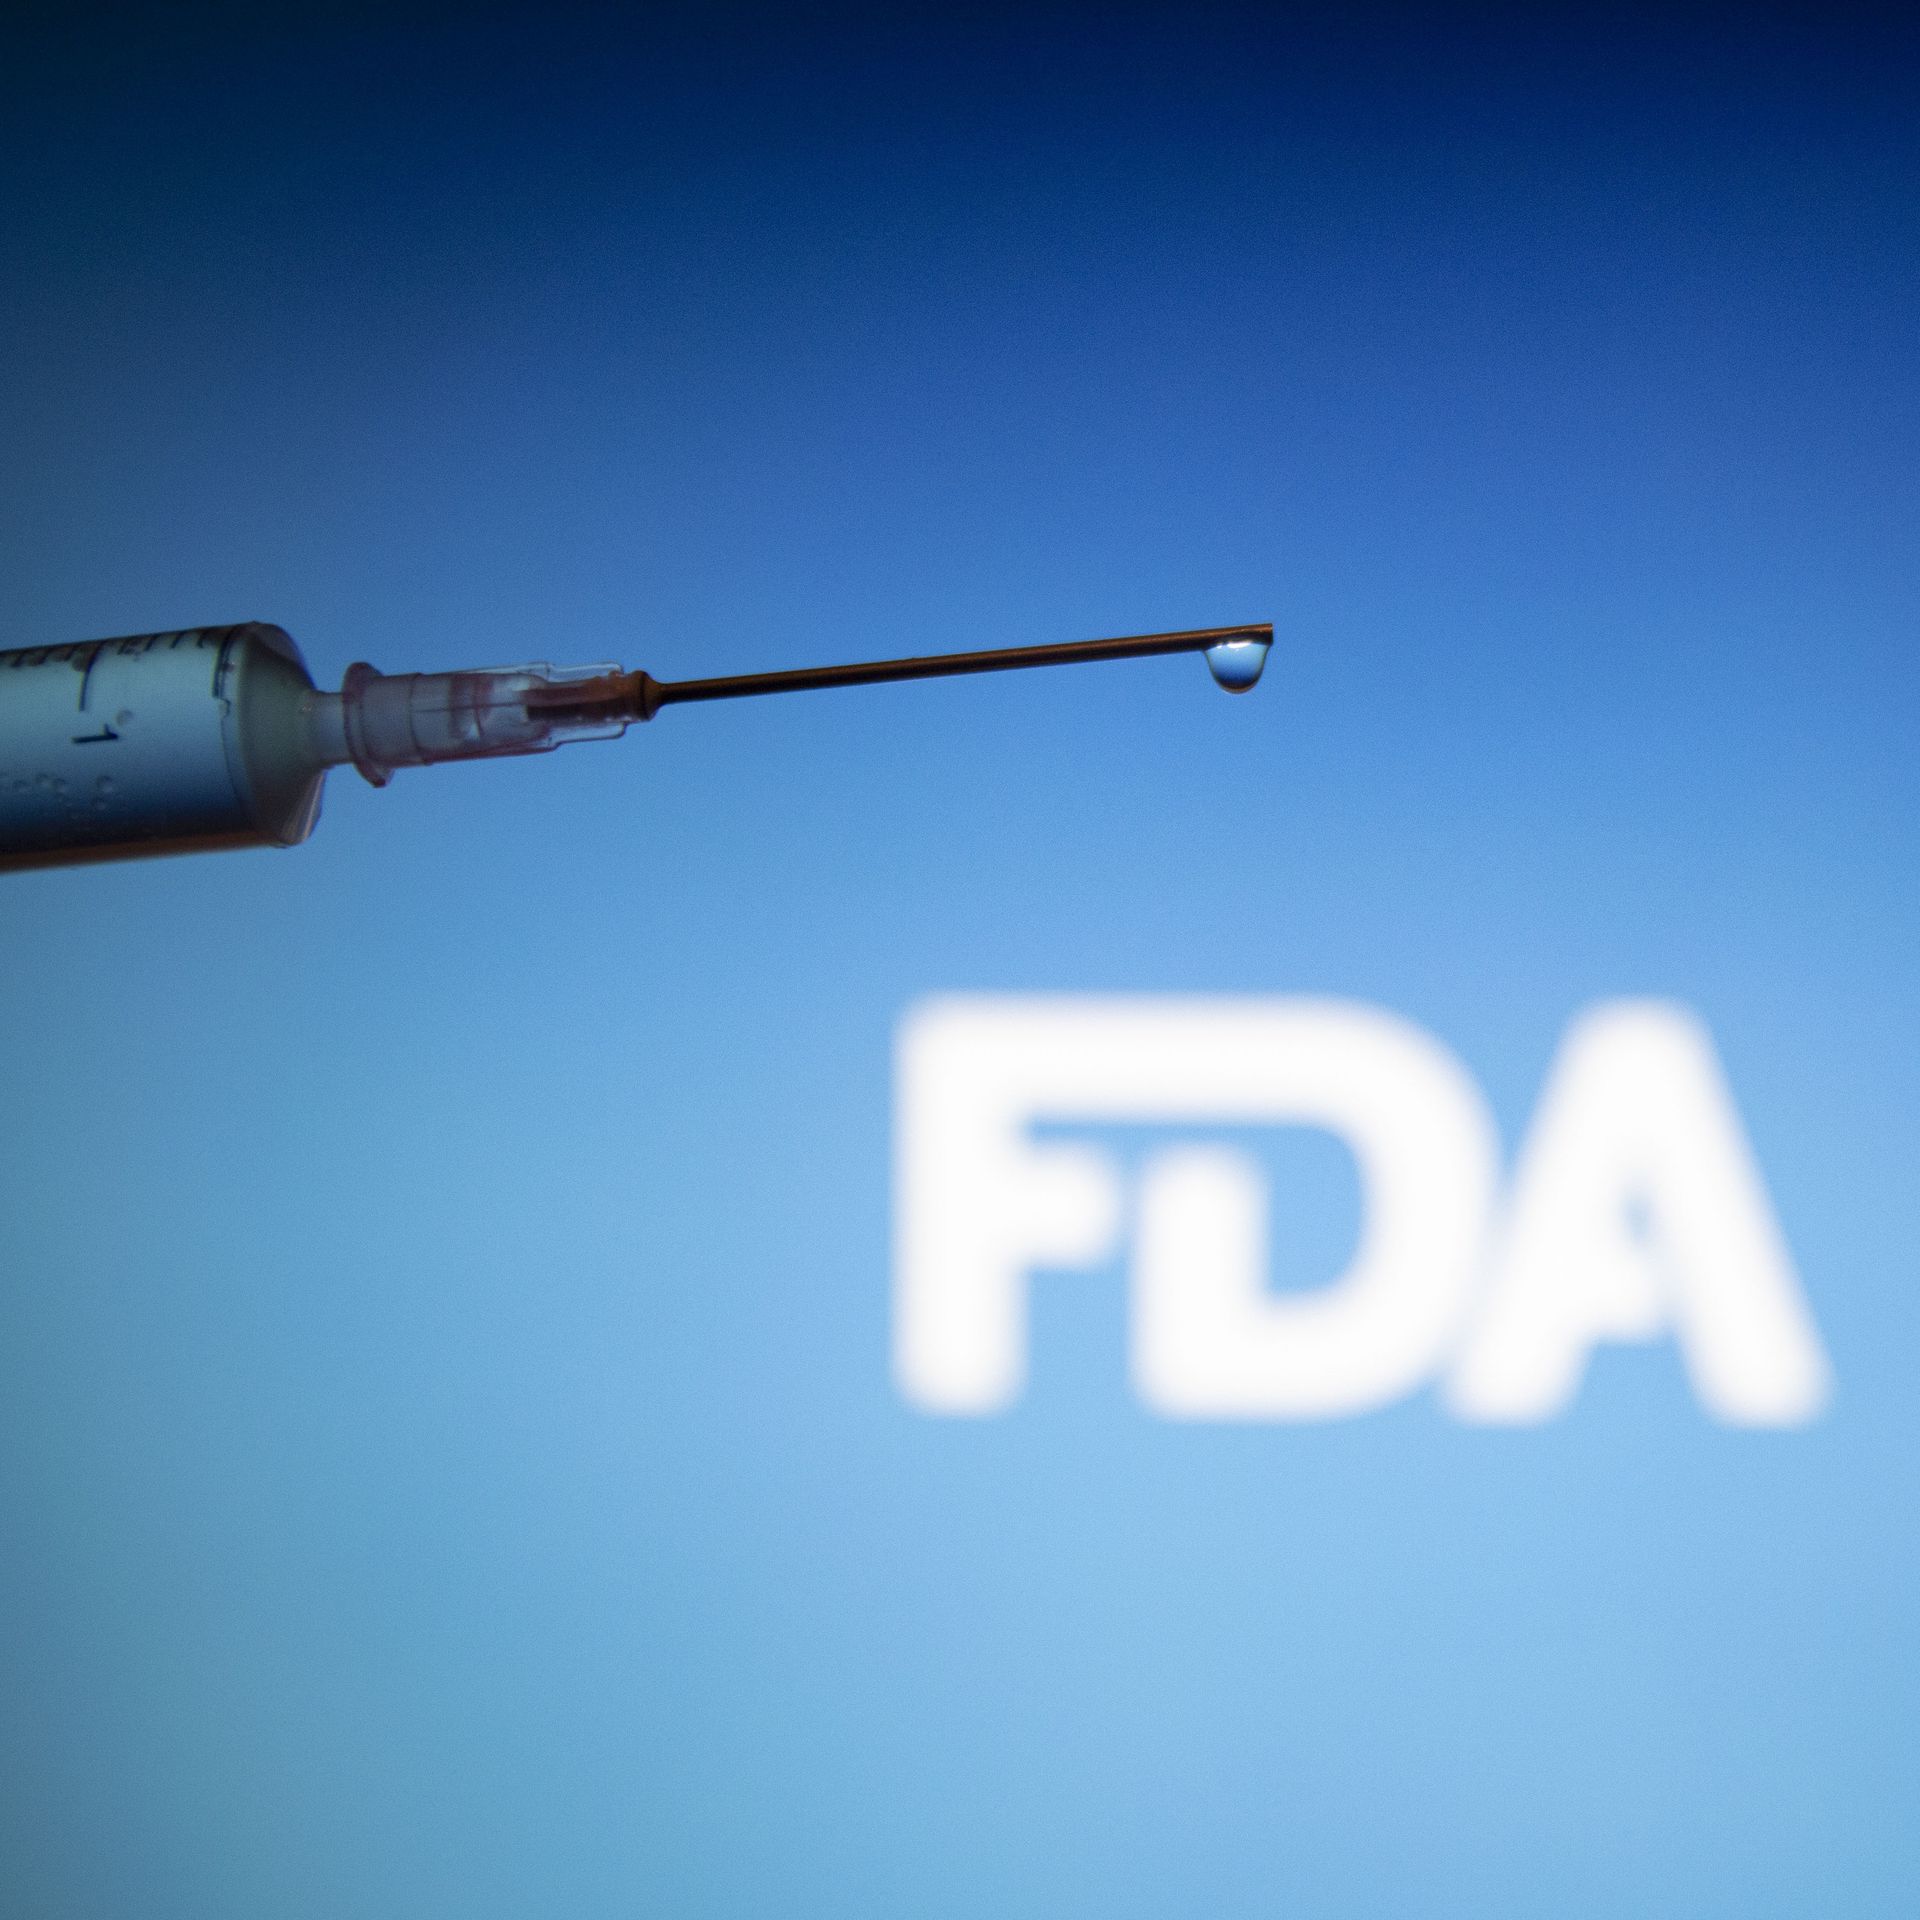 FDA vaccine advisers 'disappointed' and 'angry' that early data about new  Covid-19 booster shot wasn't presented for review last year